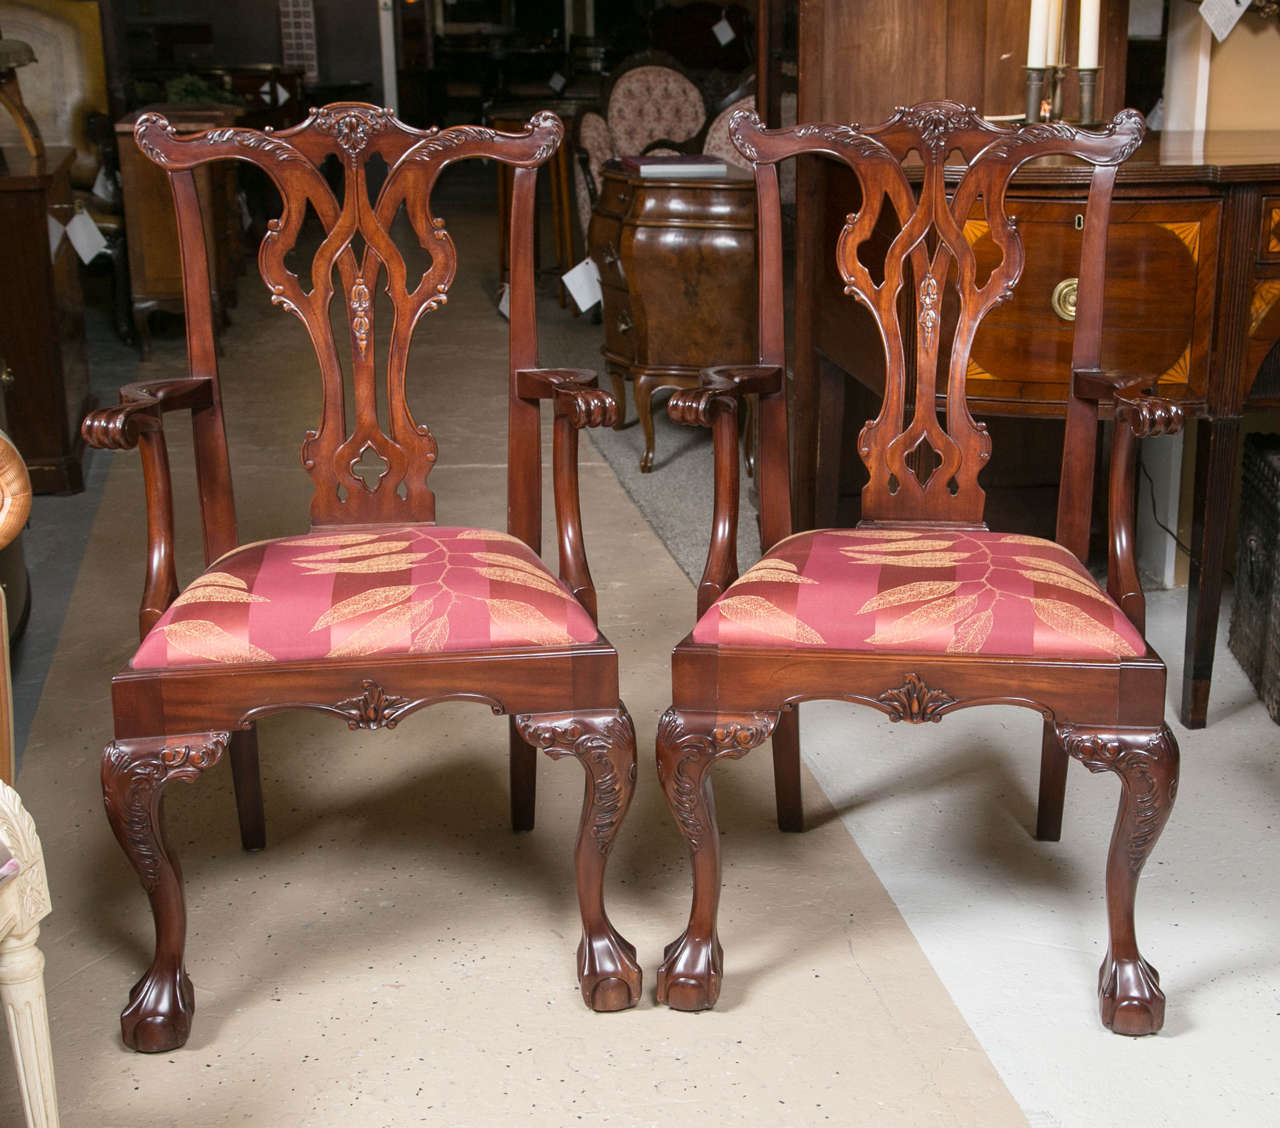 Set of Six Chippendale Style Mahogany Ball and Claw Dining Room Chairs.  All accommodating arms - which are extremely comfortable at any table setting.  A dynamic symbol of 18th century furniture - this set is perfect for any dining area, kitchen,